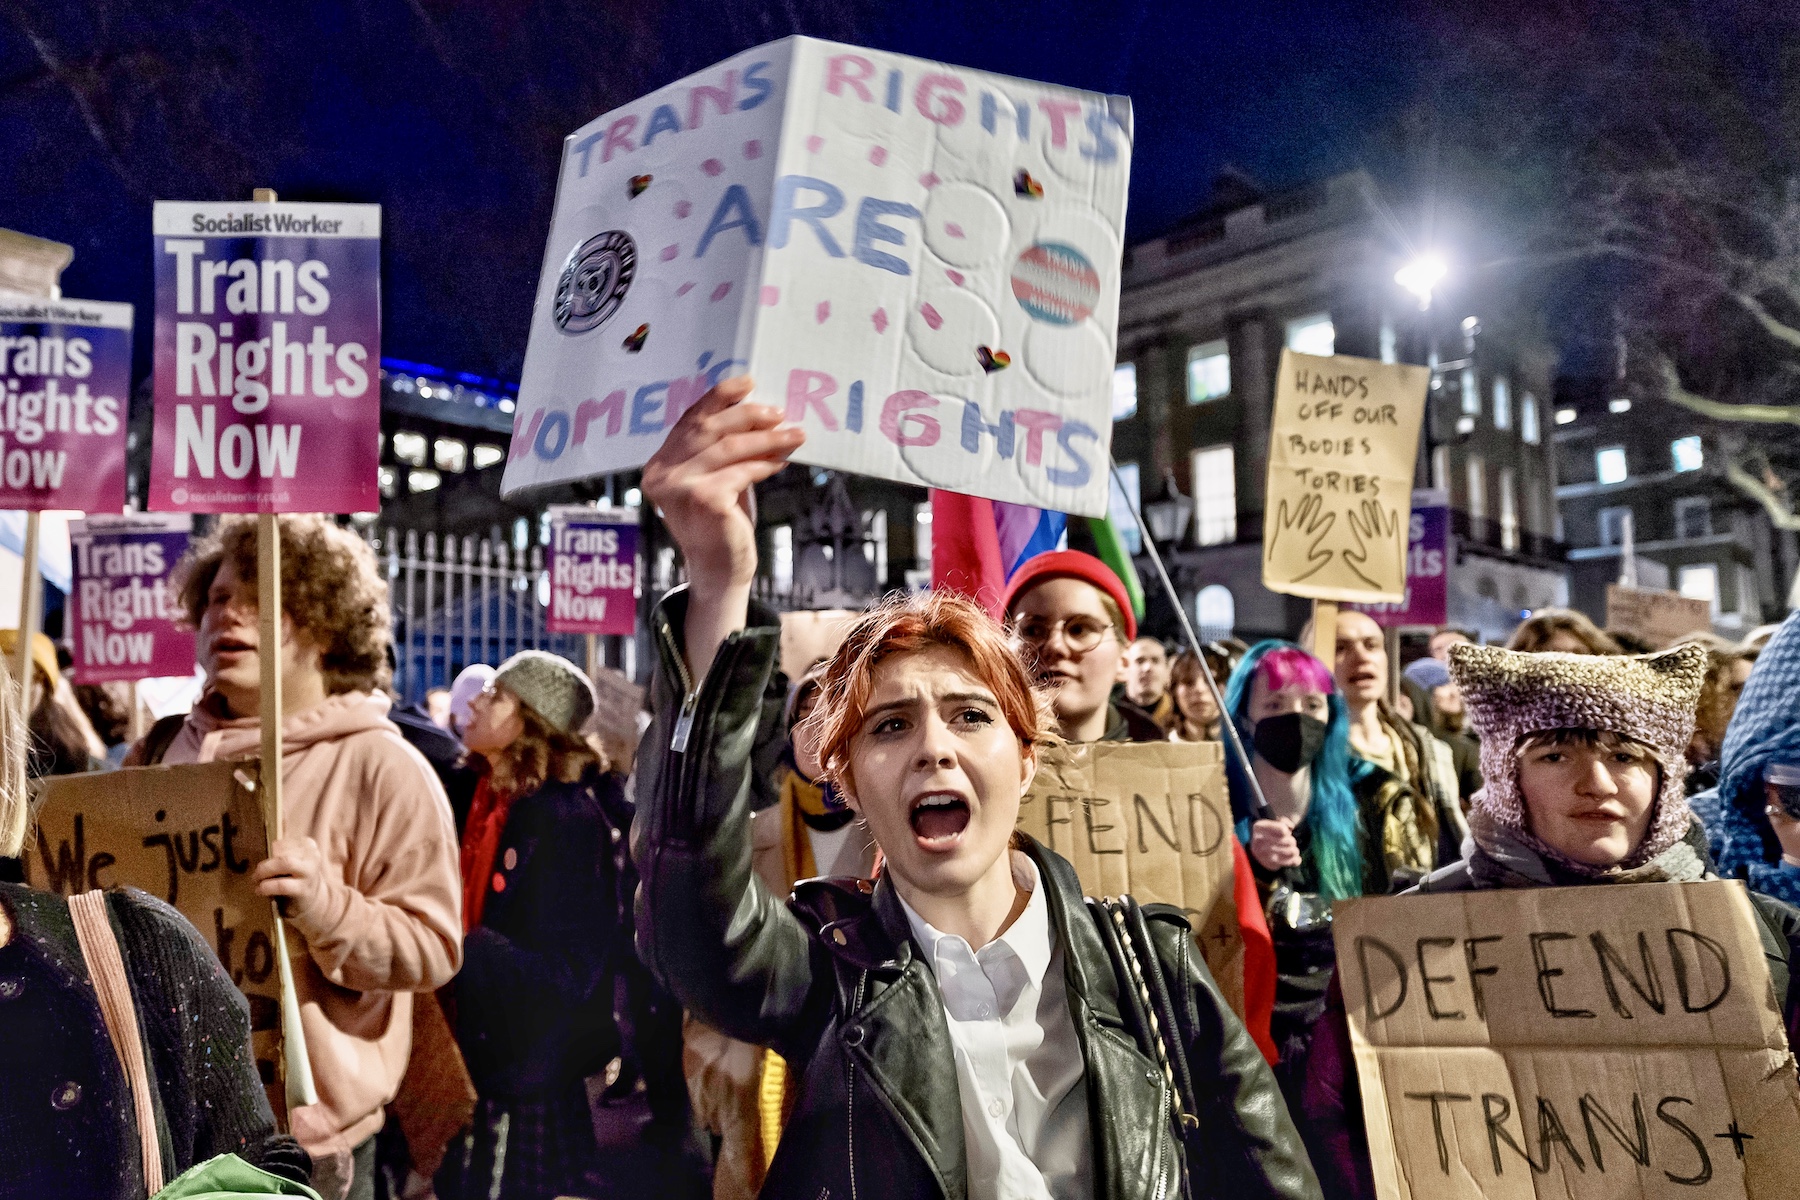 young people protesting against government for trans rights on the street